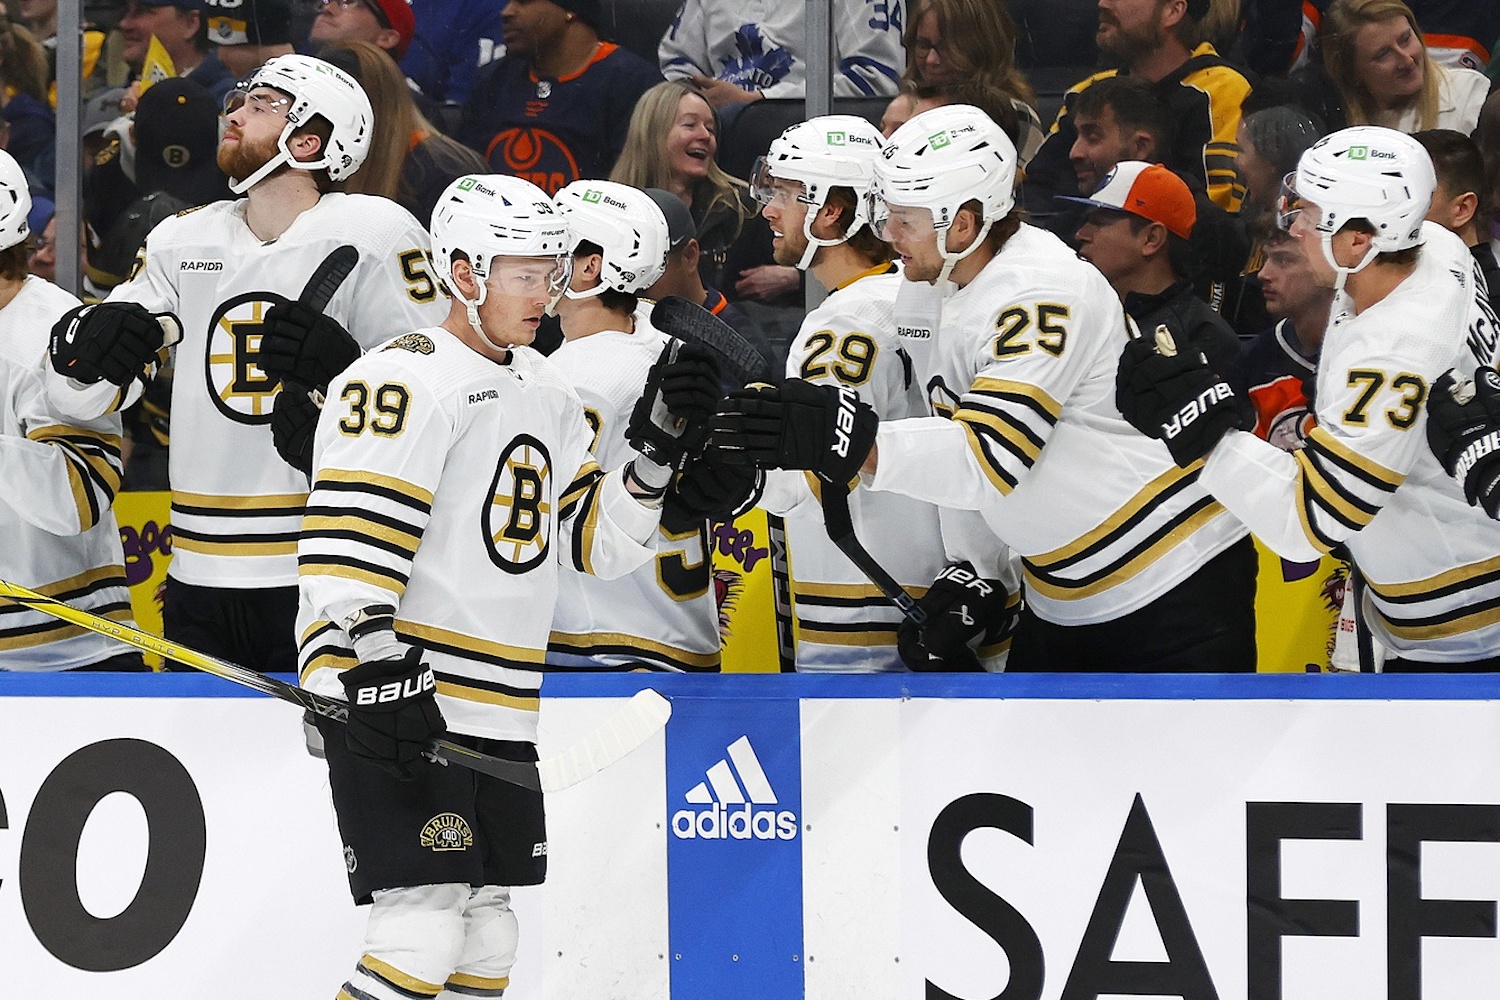 Feb 21, 2024; Edmonton, Alberta, CAN; The Boston Bruins celebrate a goal scored by forward Morgan Geekie (39) during the first period against the Edmonton Oilers at Rogers Place. Mandatory Credit: Perry Nelson-USA TODAY Sports